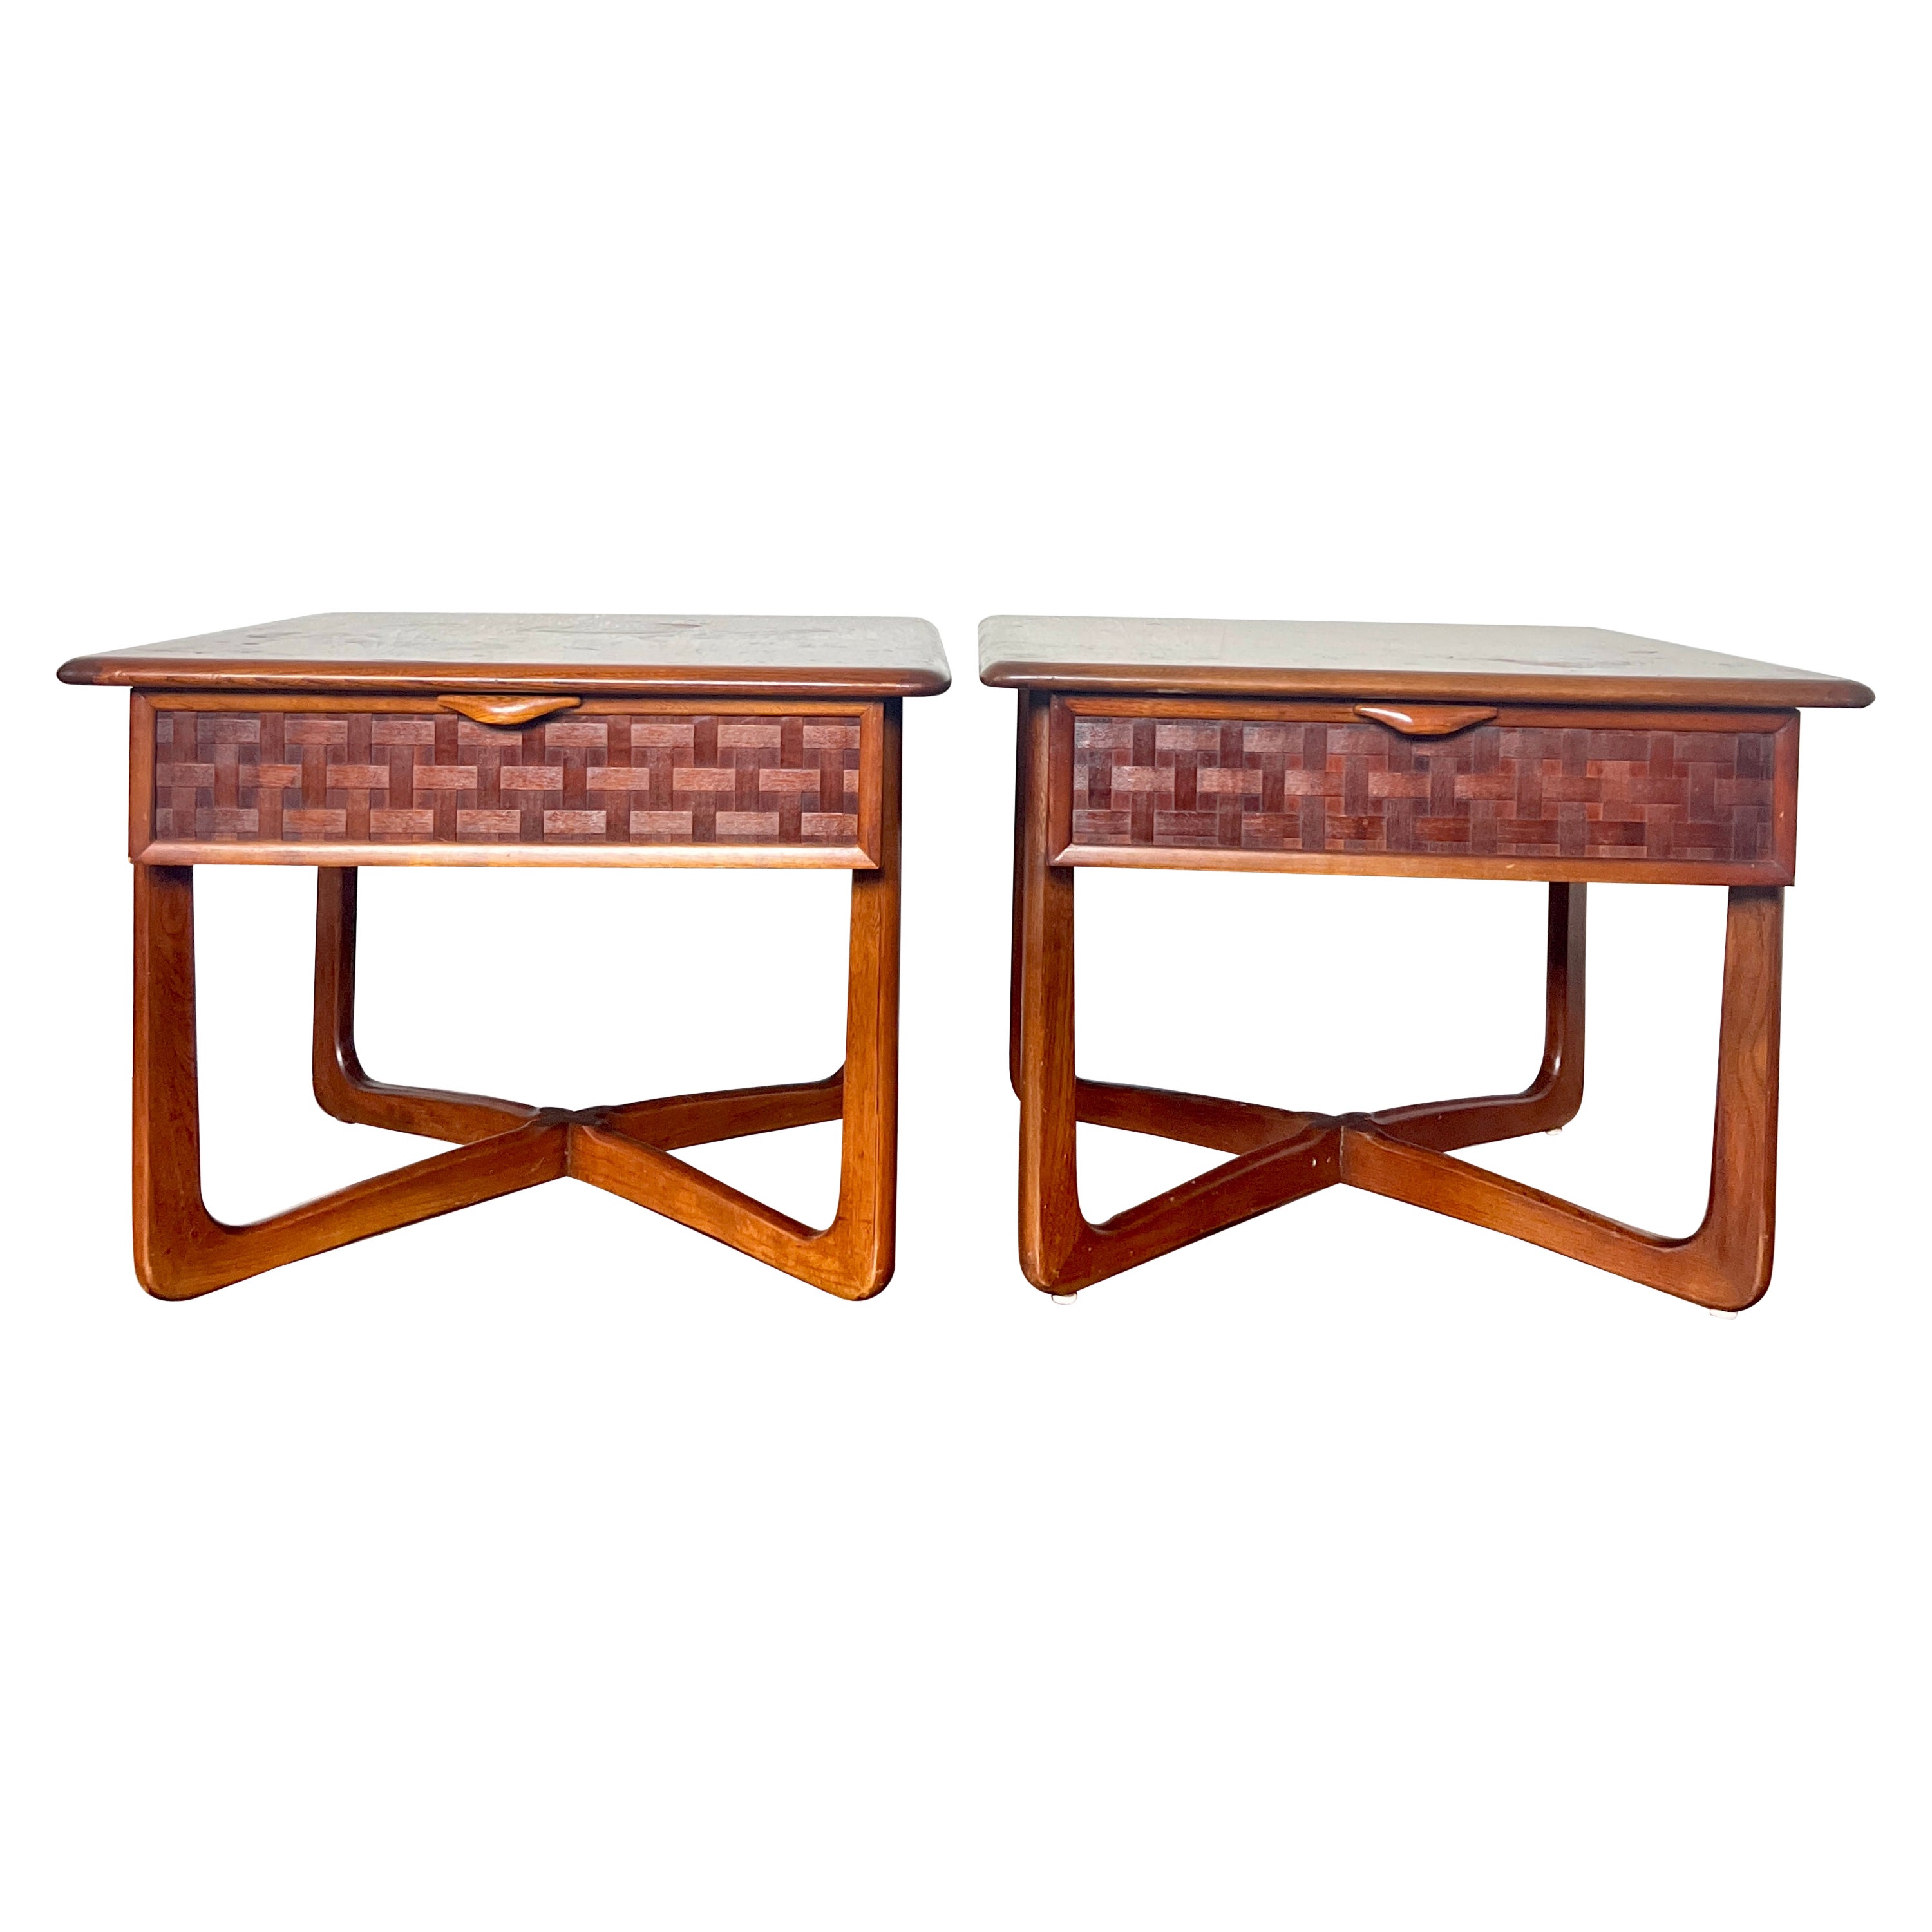 Pair of Mid-Century Modern Lane Perception Side Tables with a Cross Cross Base